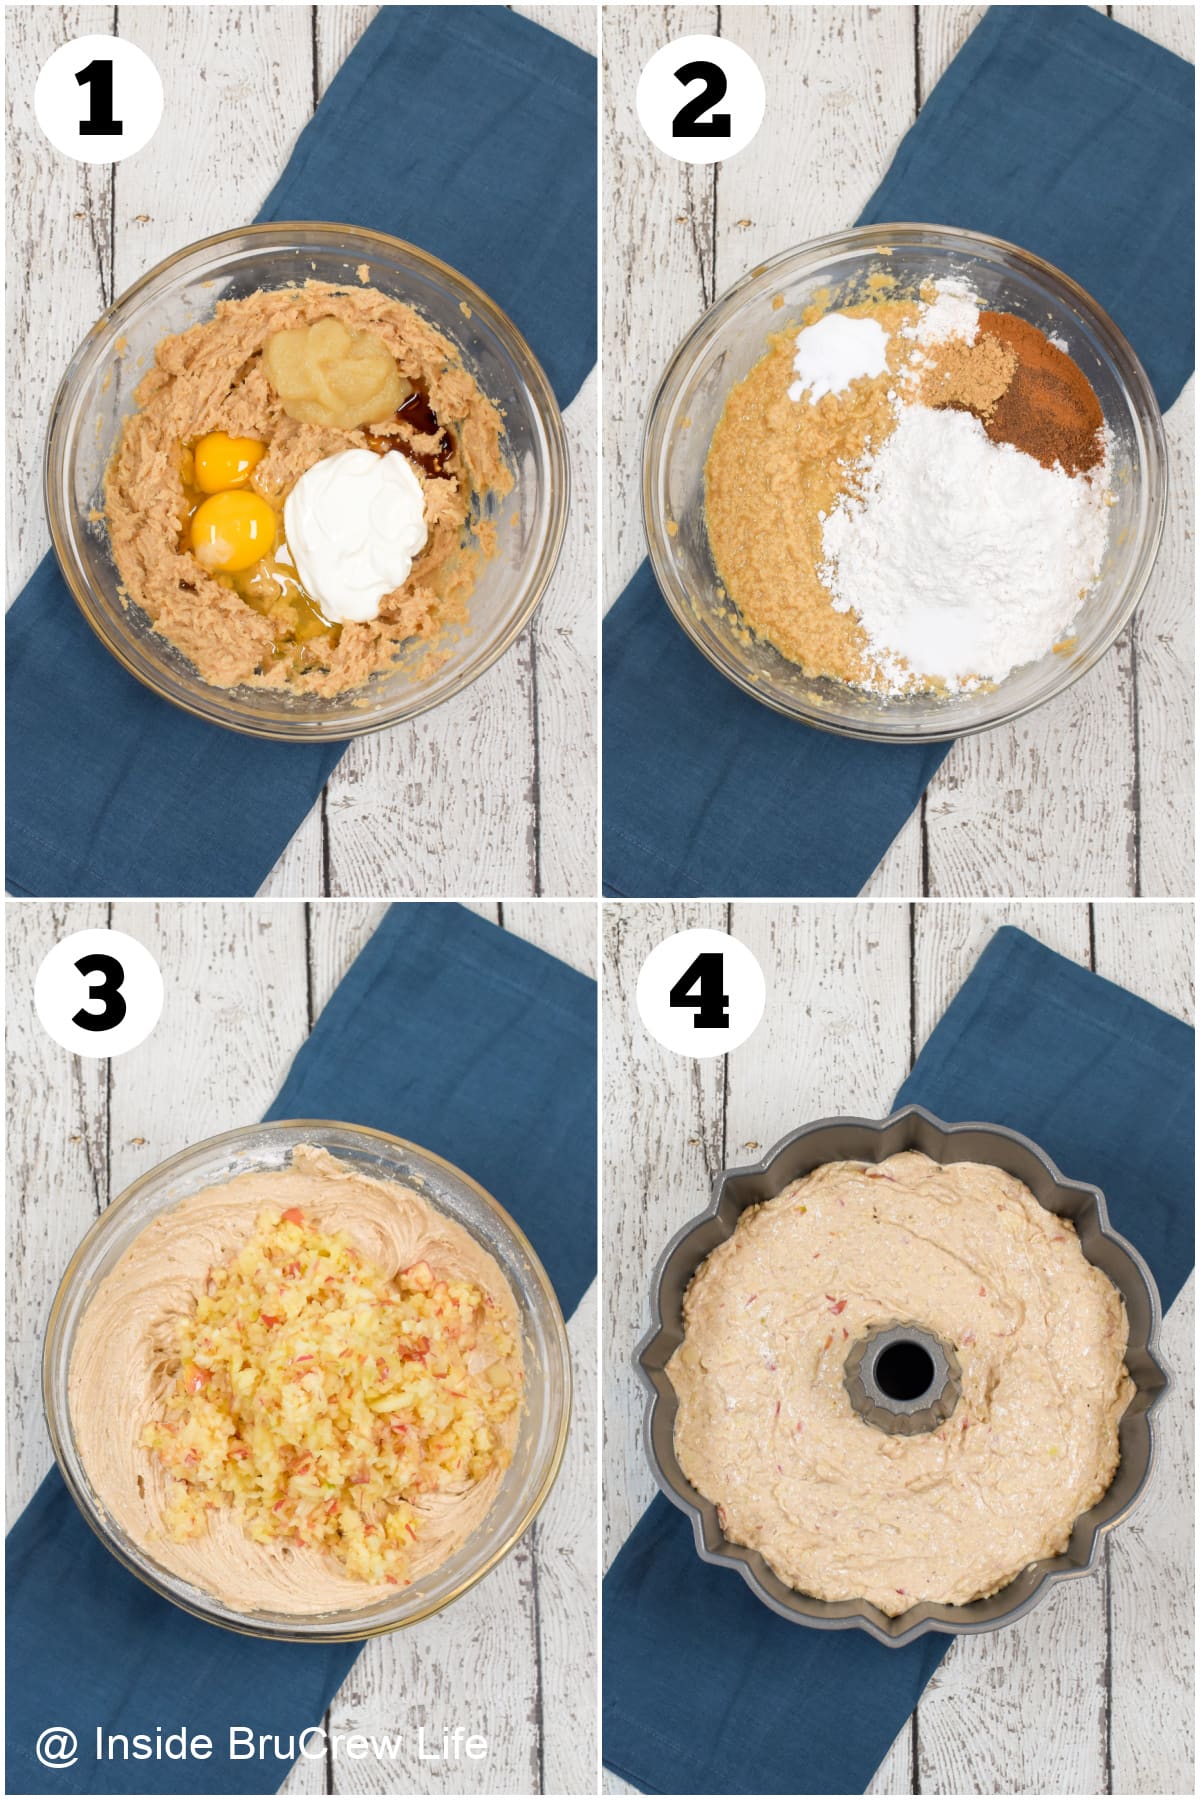 Four pictures collaged together showing how to make an apple bundt cake.